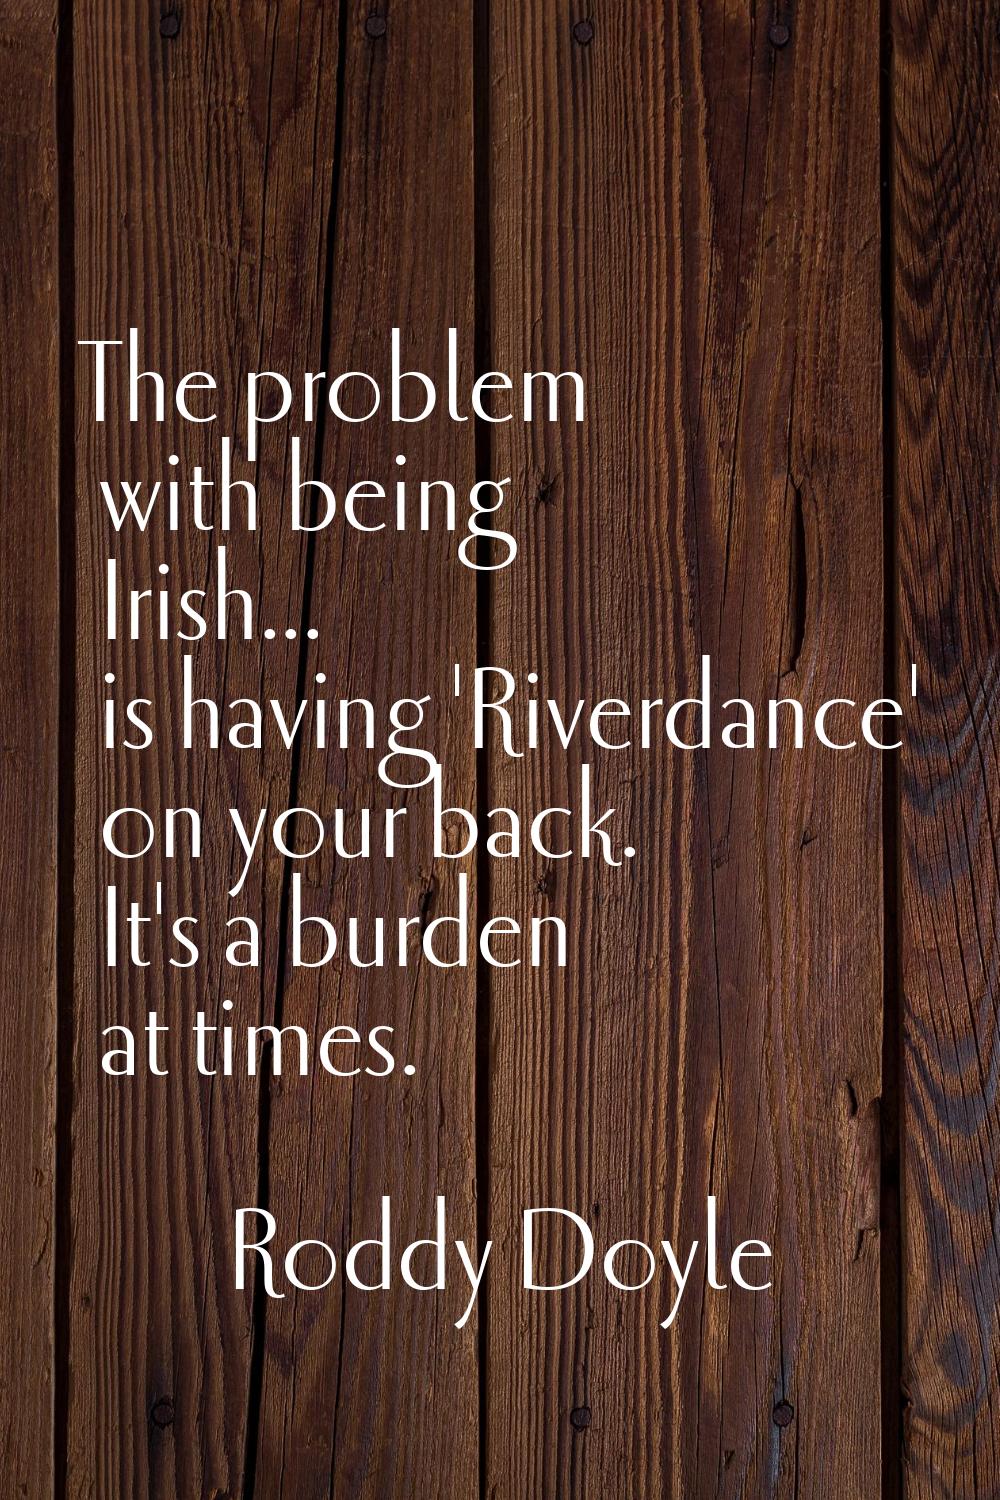 The problem with being Irish... is having 'Riverdance' on your back. It's a burden at times.